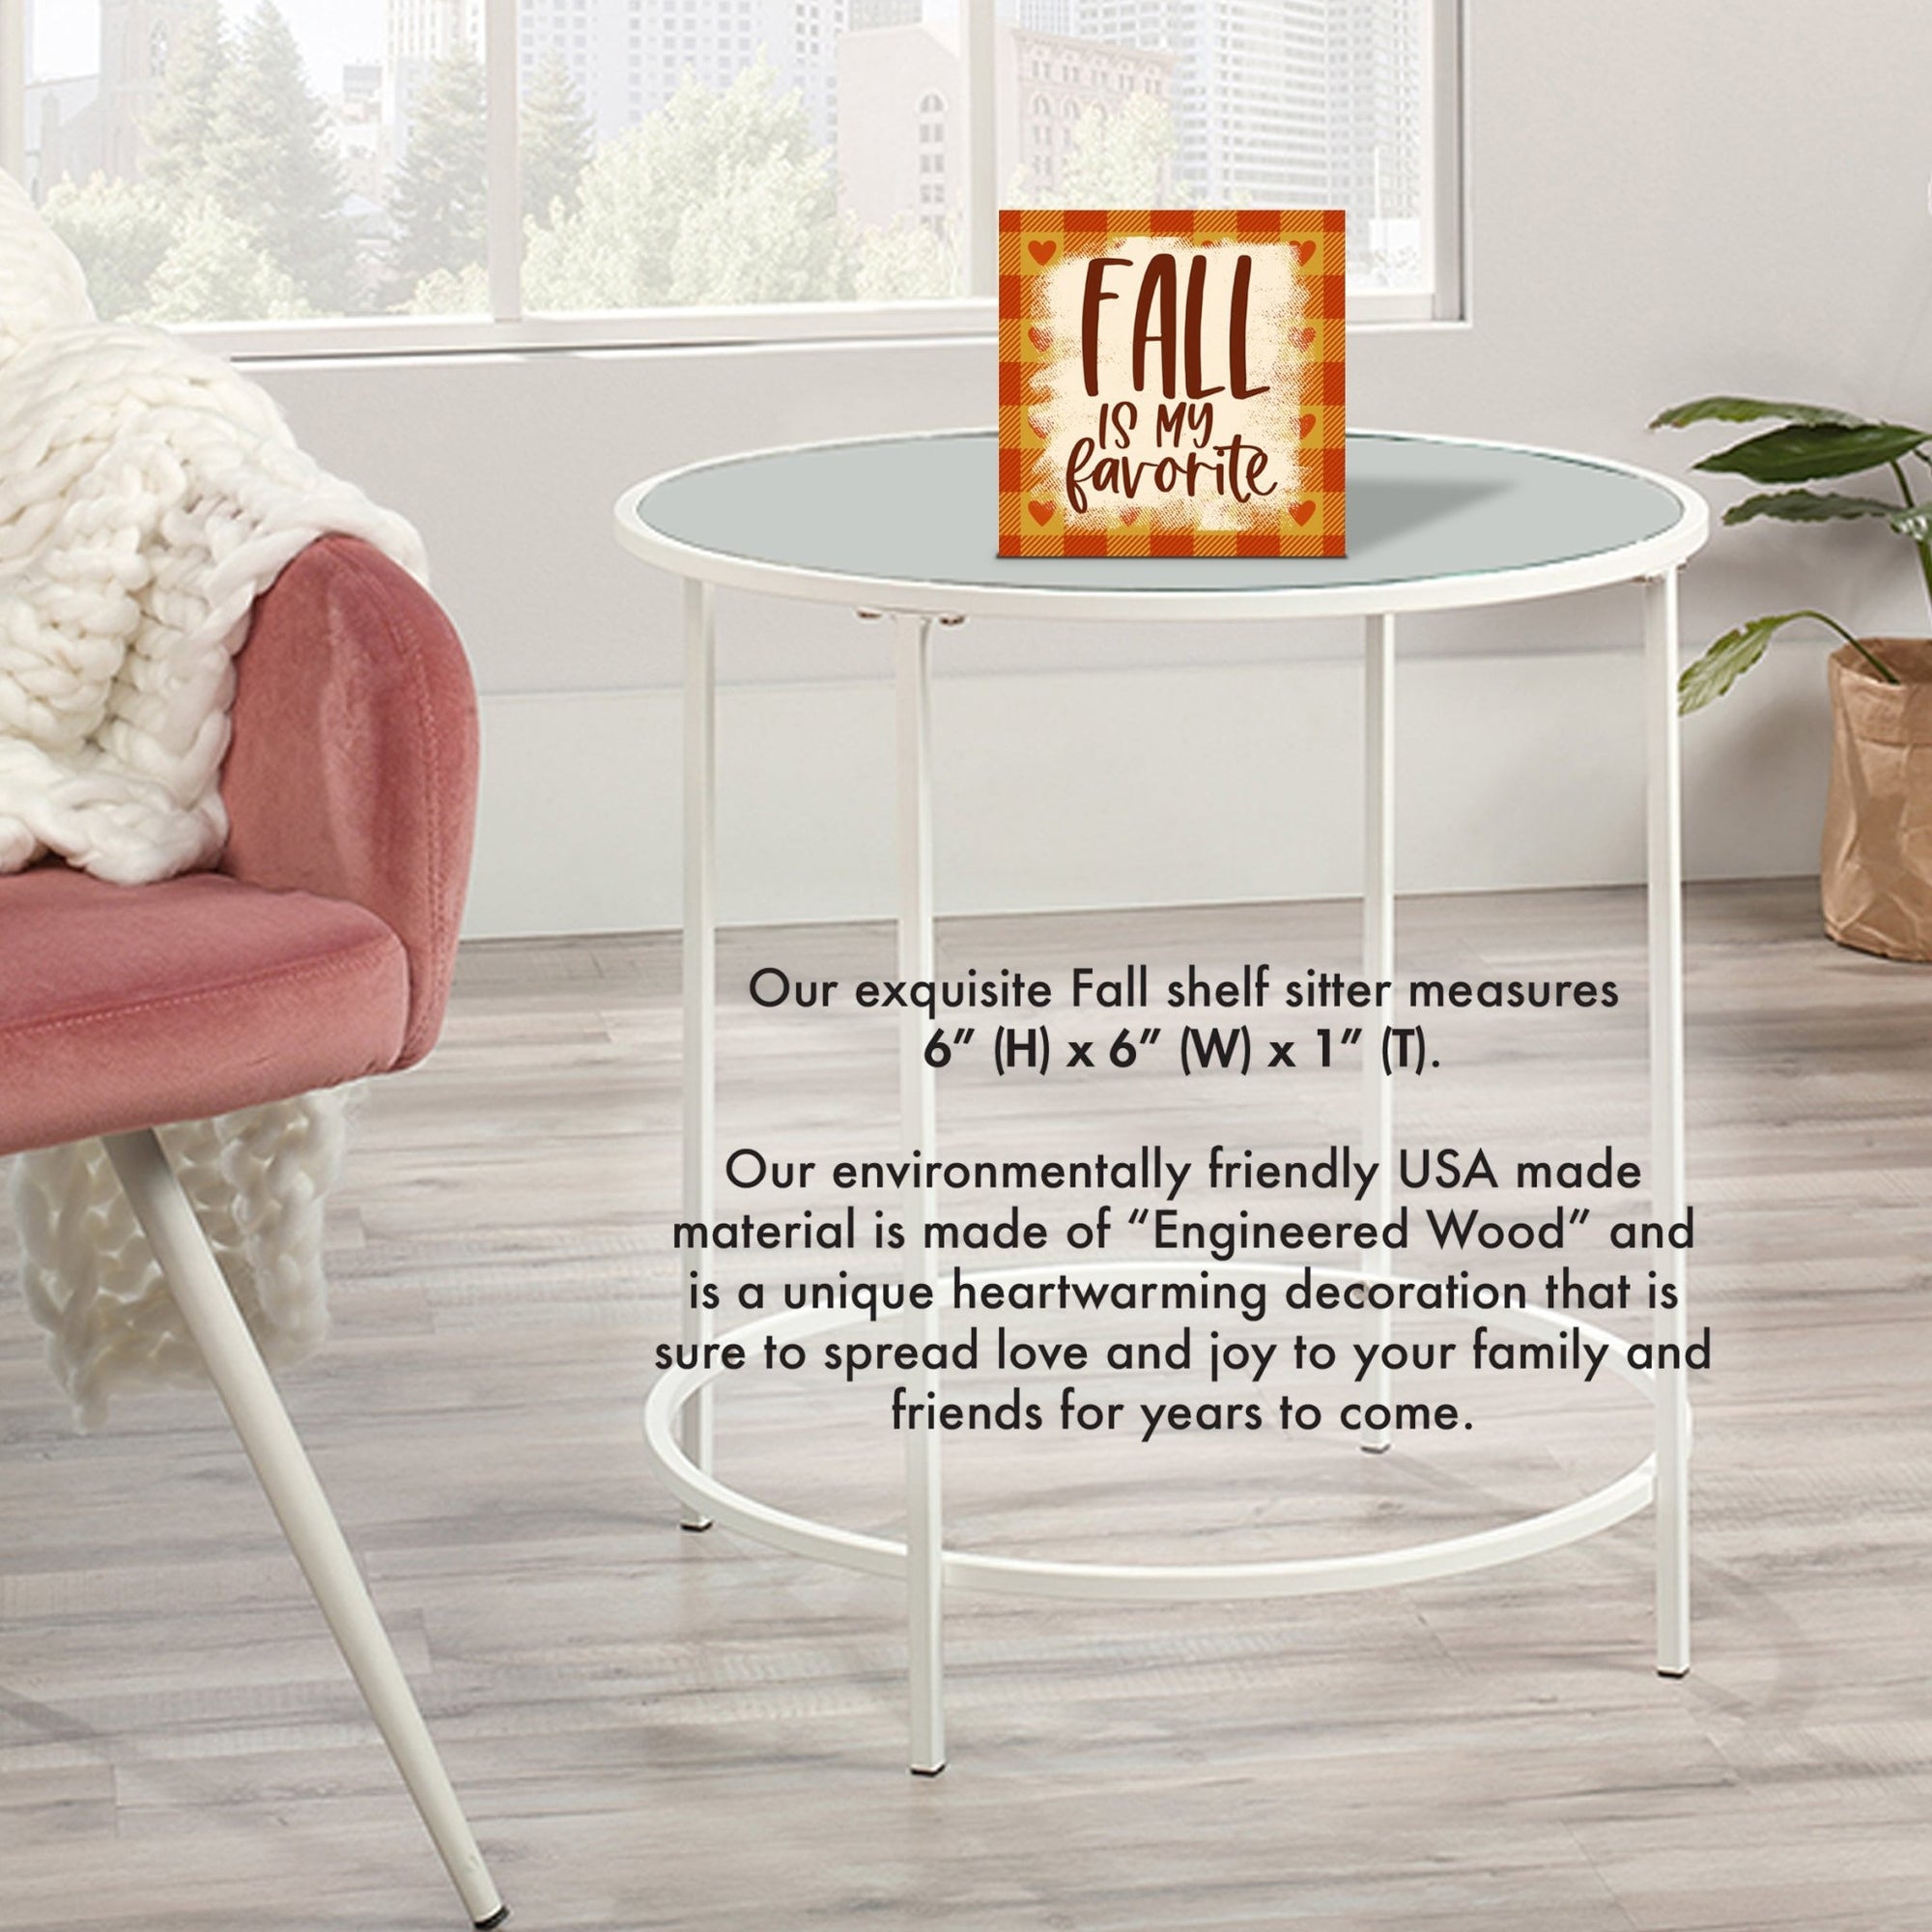 Inspirational Fall Themed Unique Shelf Décor and Tabletop Signs - Fall Is My Favorite - LifeSong Milestones